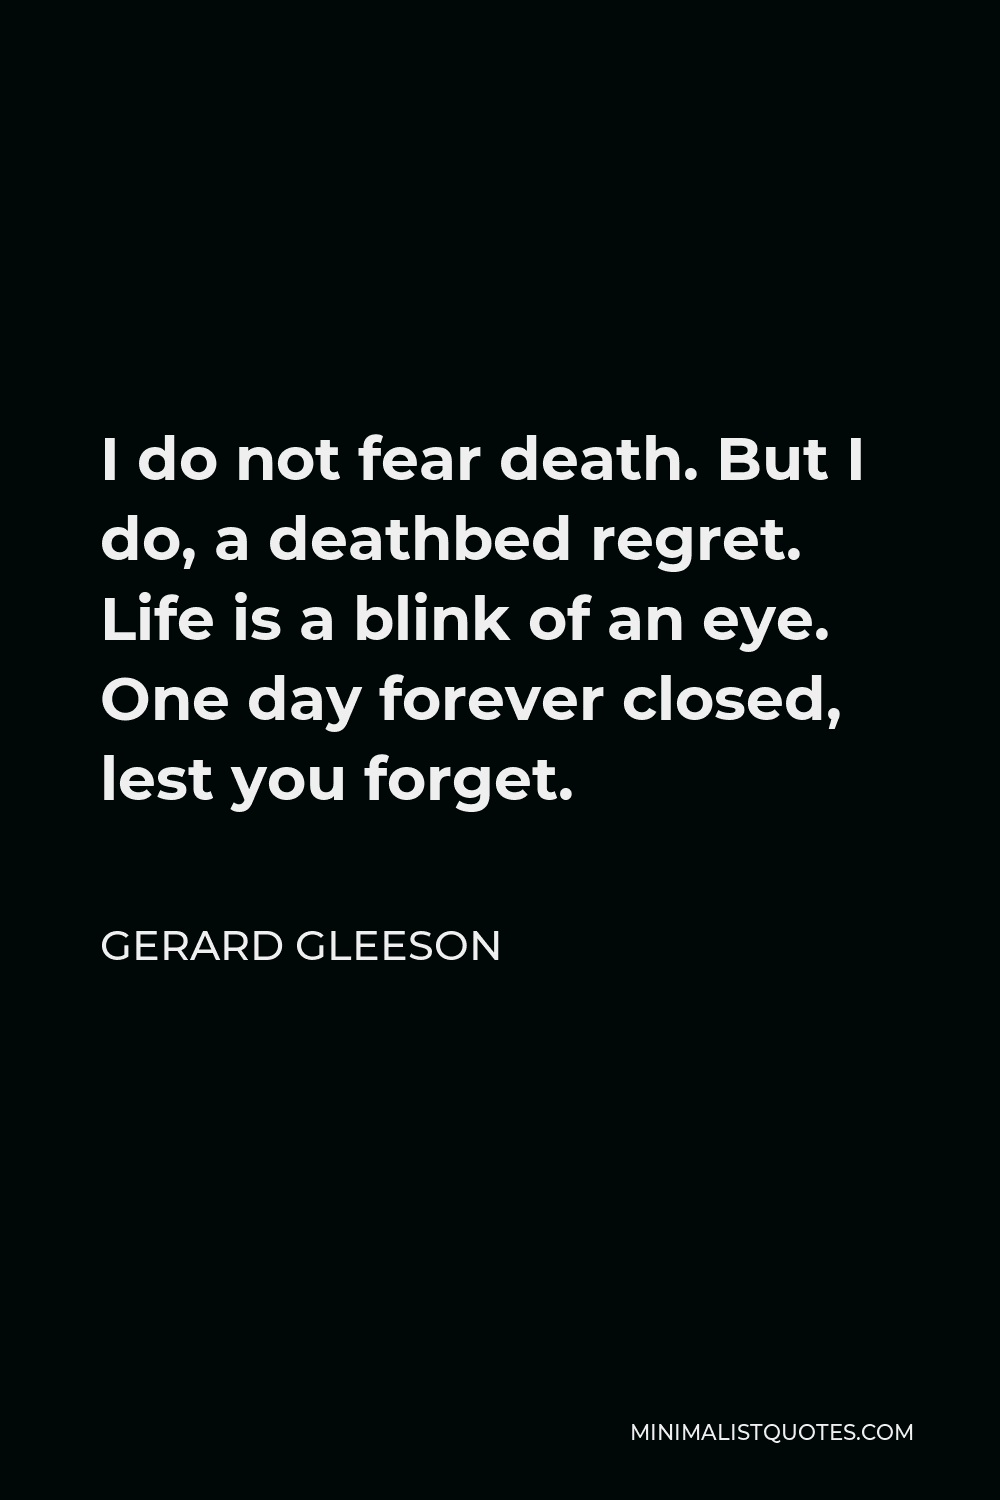 Gerard Gleeson Quote I Do Not Fear Death But I Do A Deathbed Regret Life Is A Blink Of An Eye One Day Forever Closed Lest You Forget